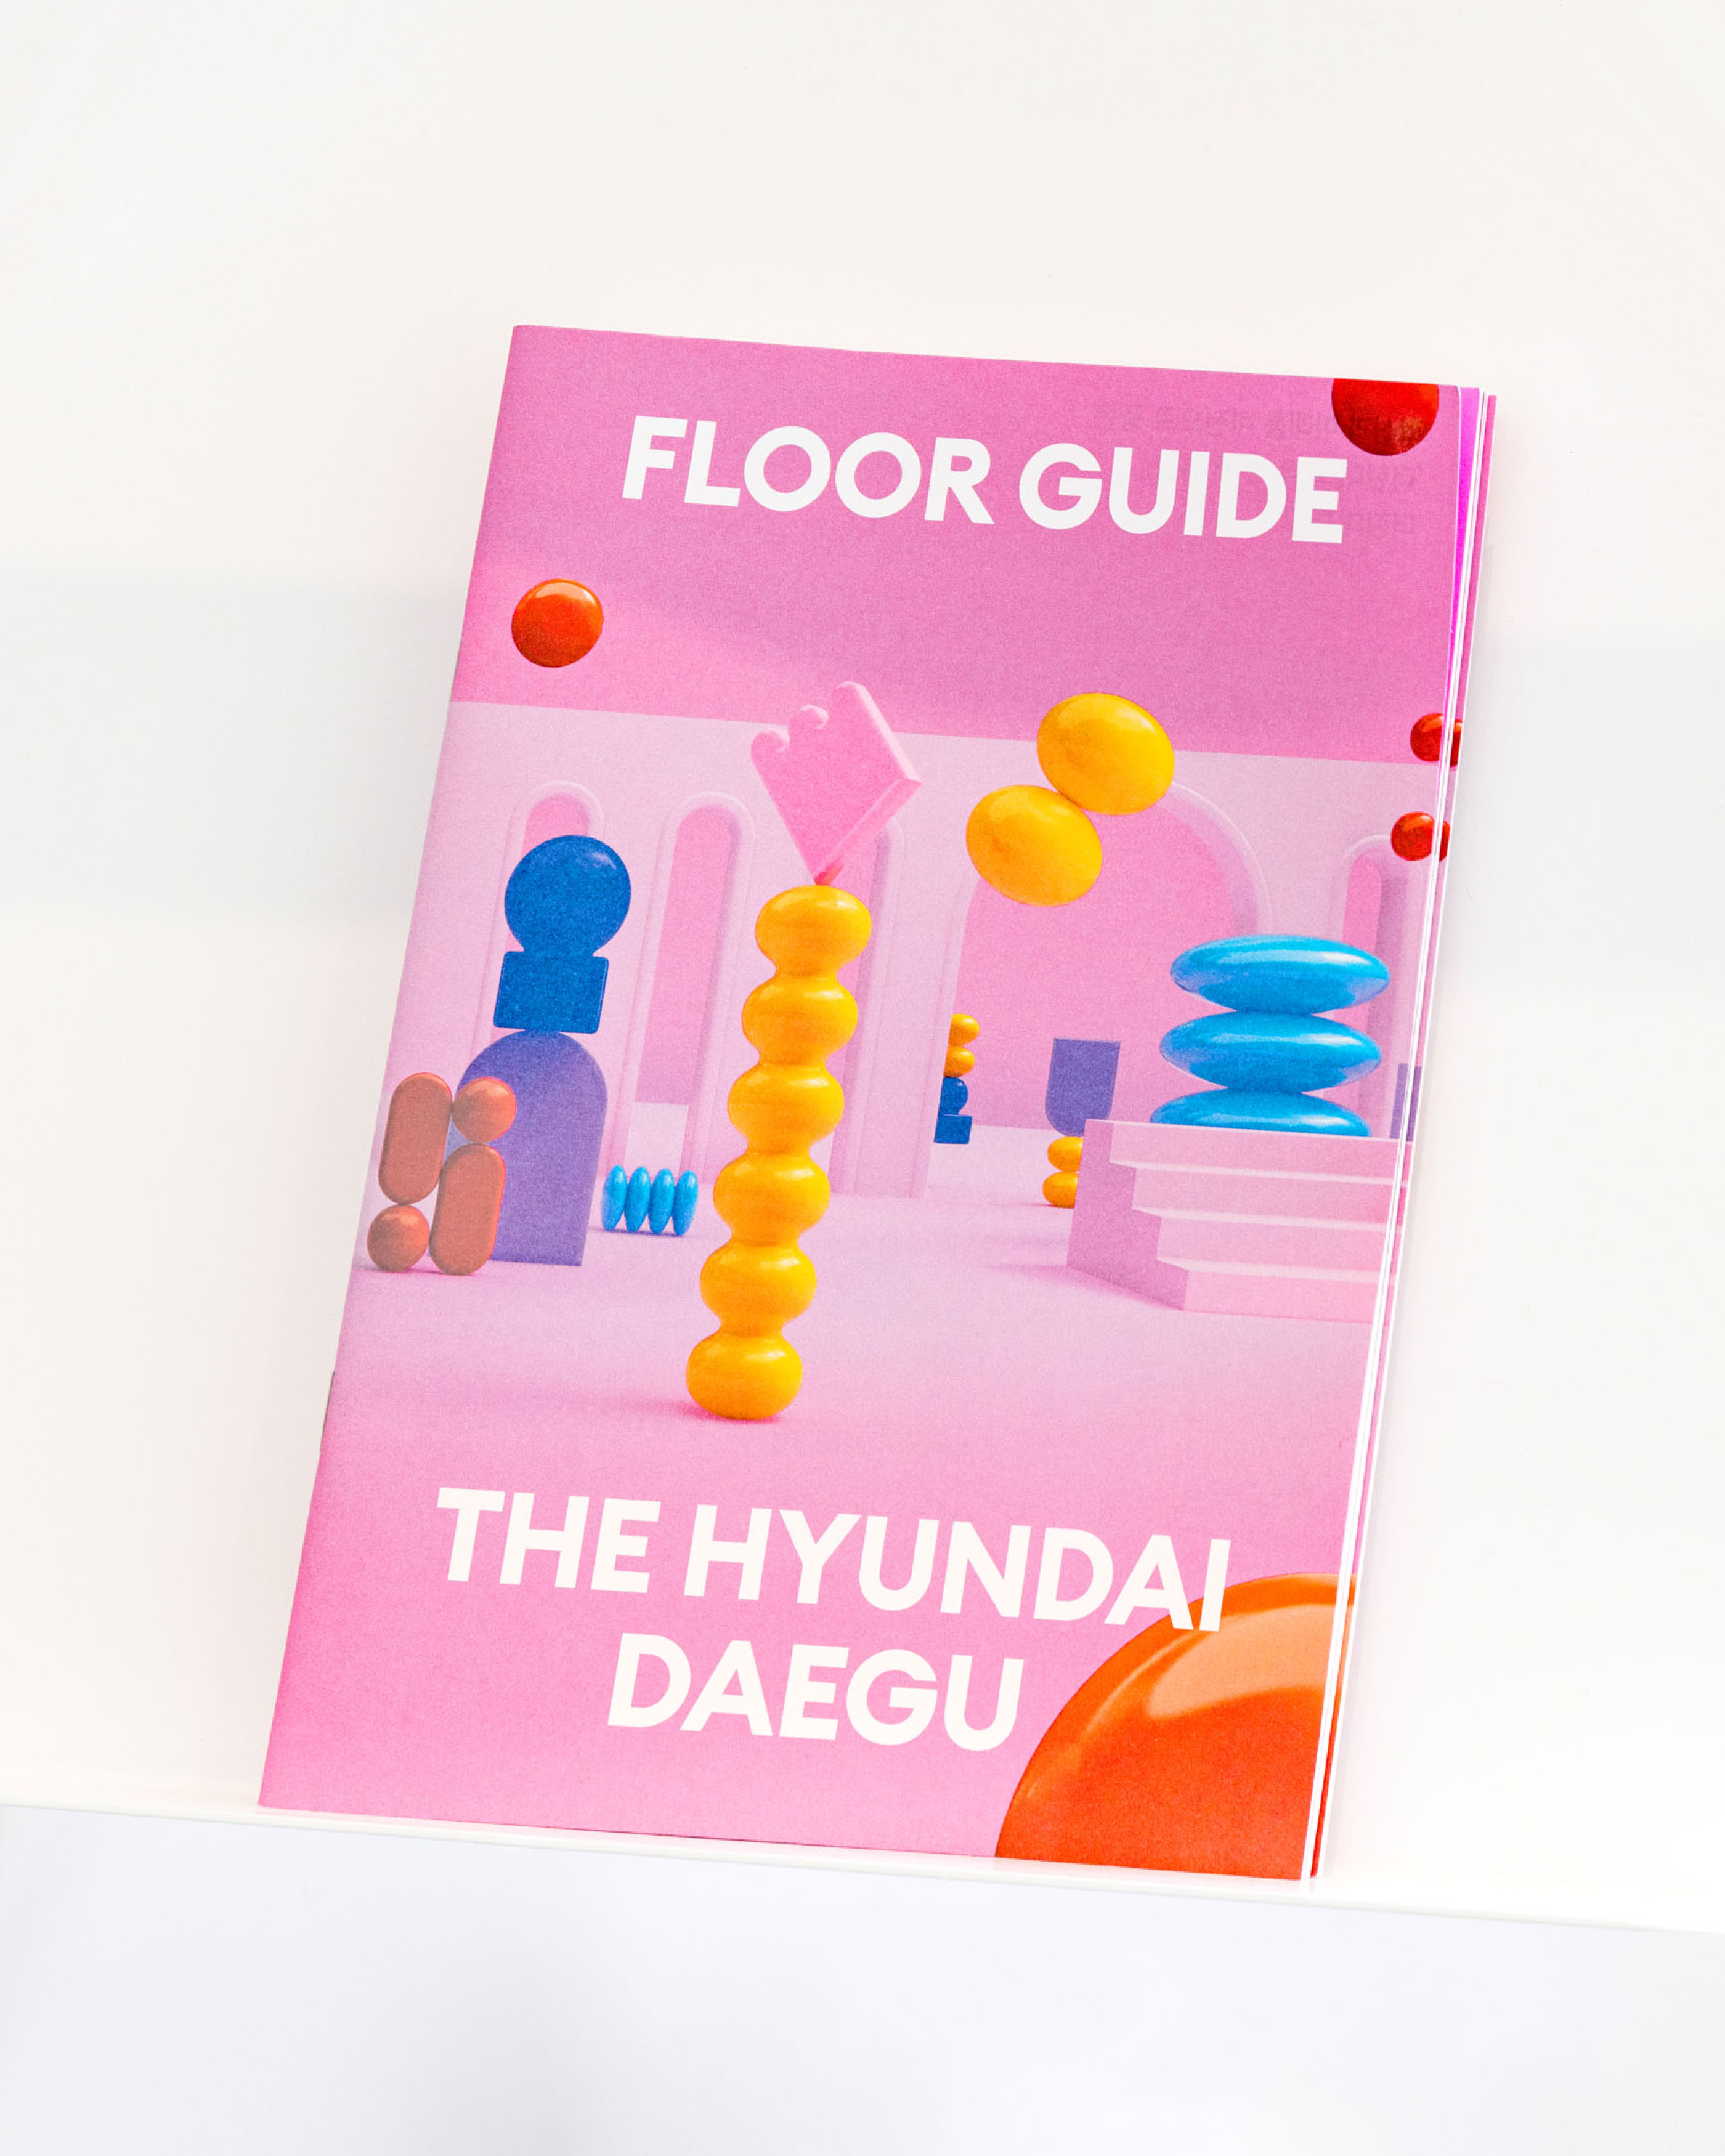 Floor guide design as part of a campaign for the Hyundai Department Store in Daegu.